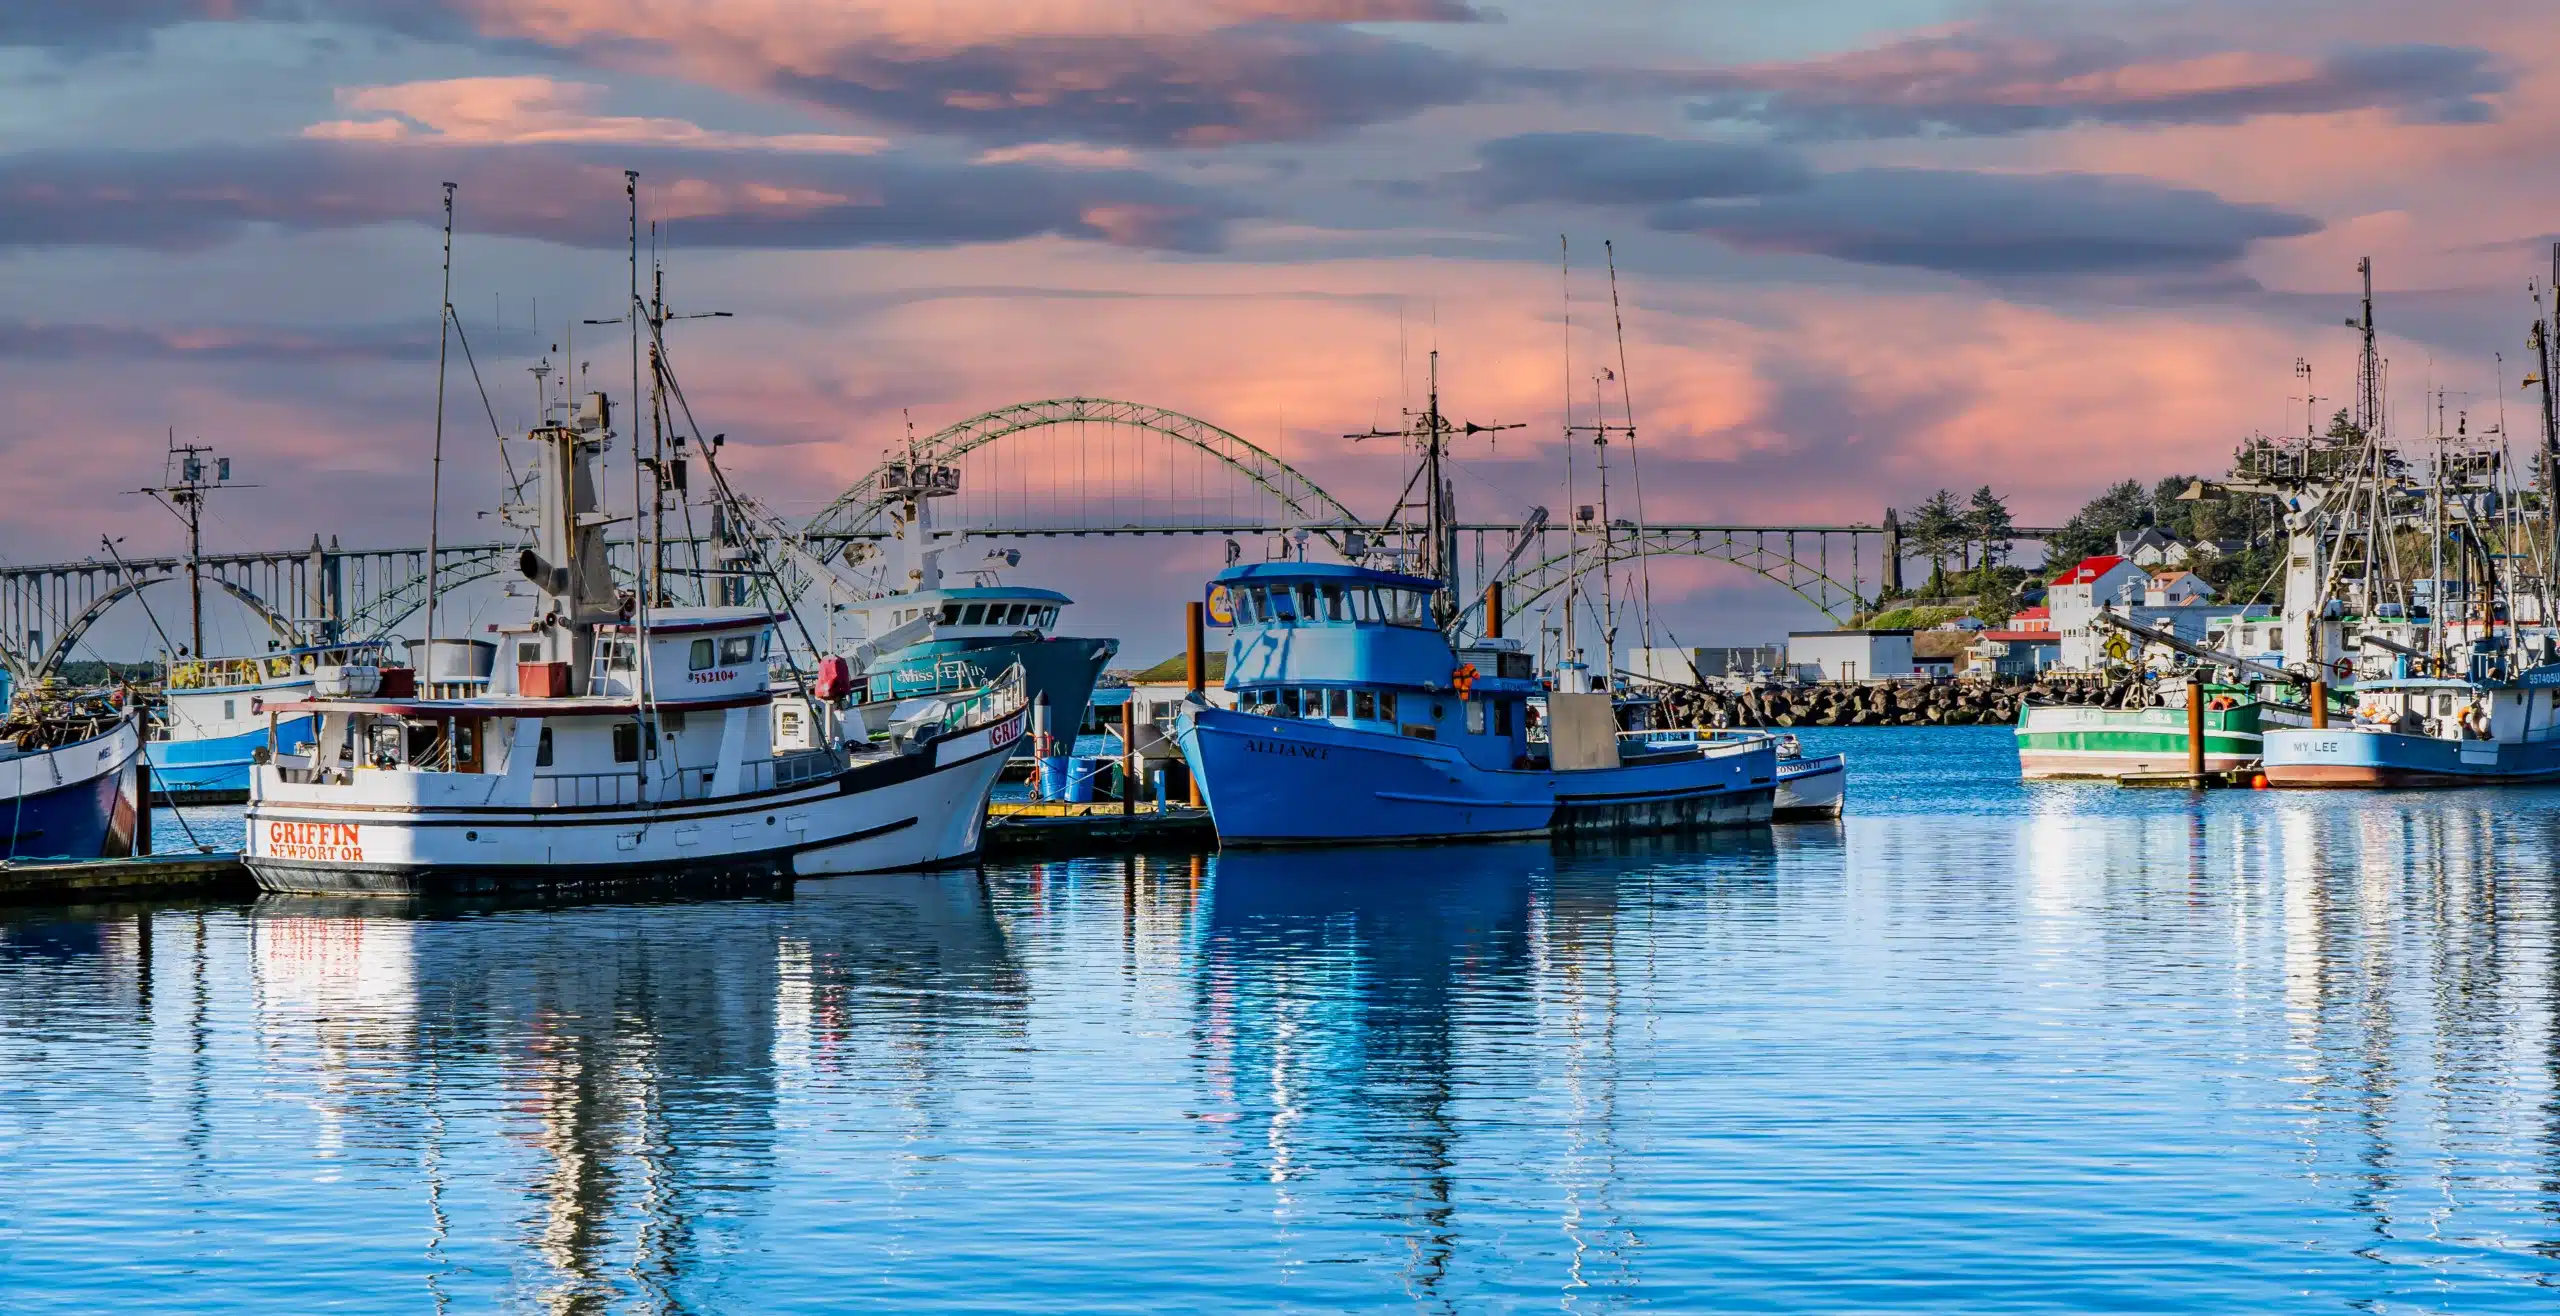 13 Things to Do in Newport, Oregon from Paddling and Fishing to Relaxing on the Beach